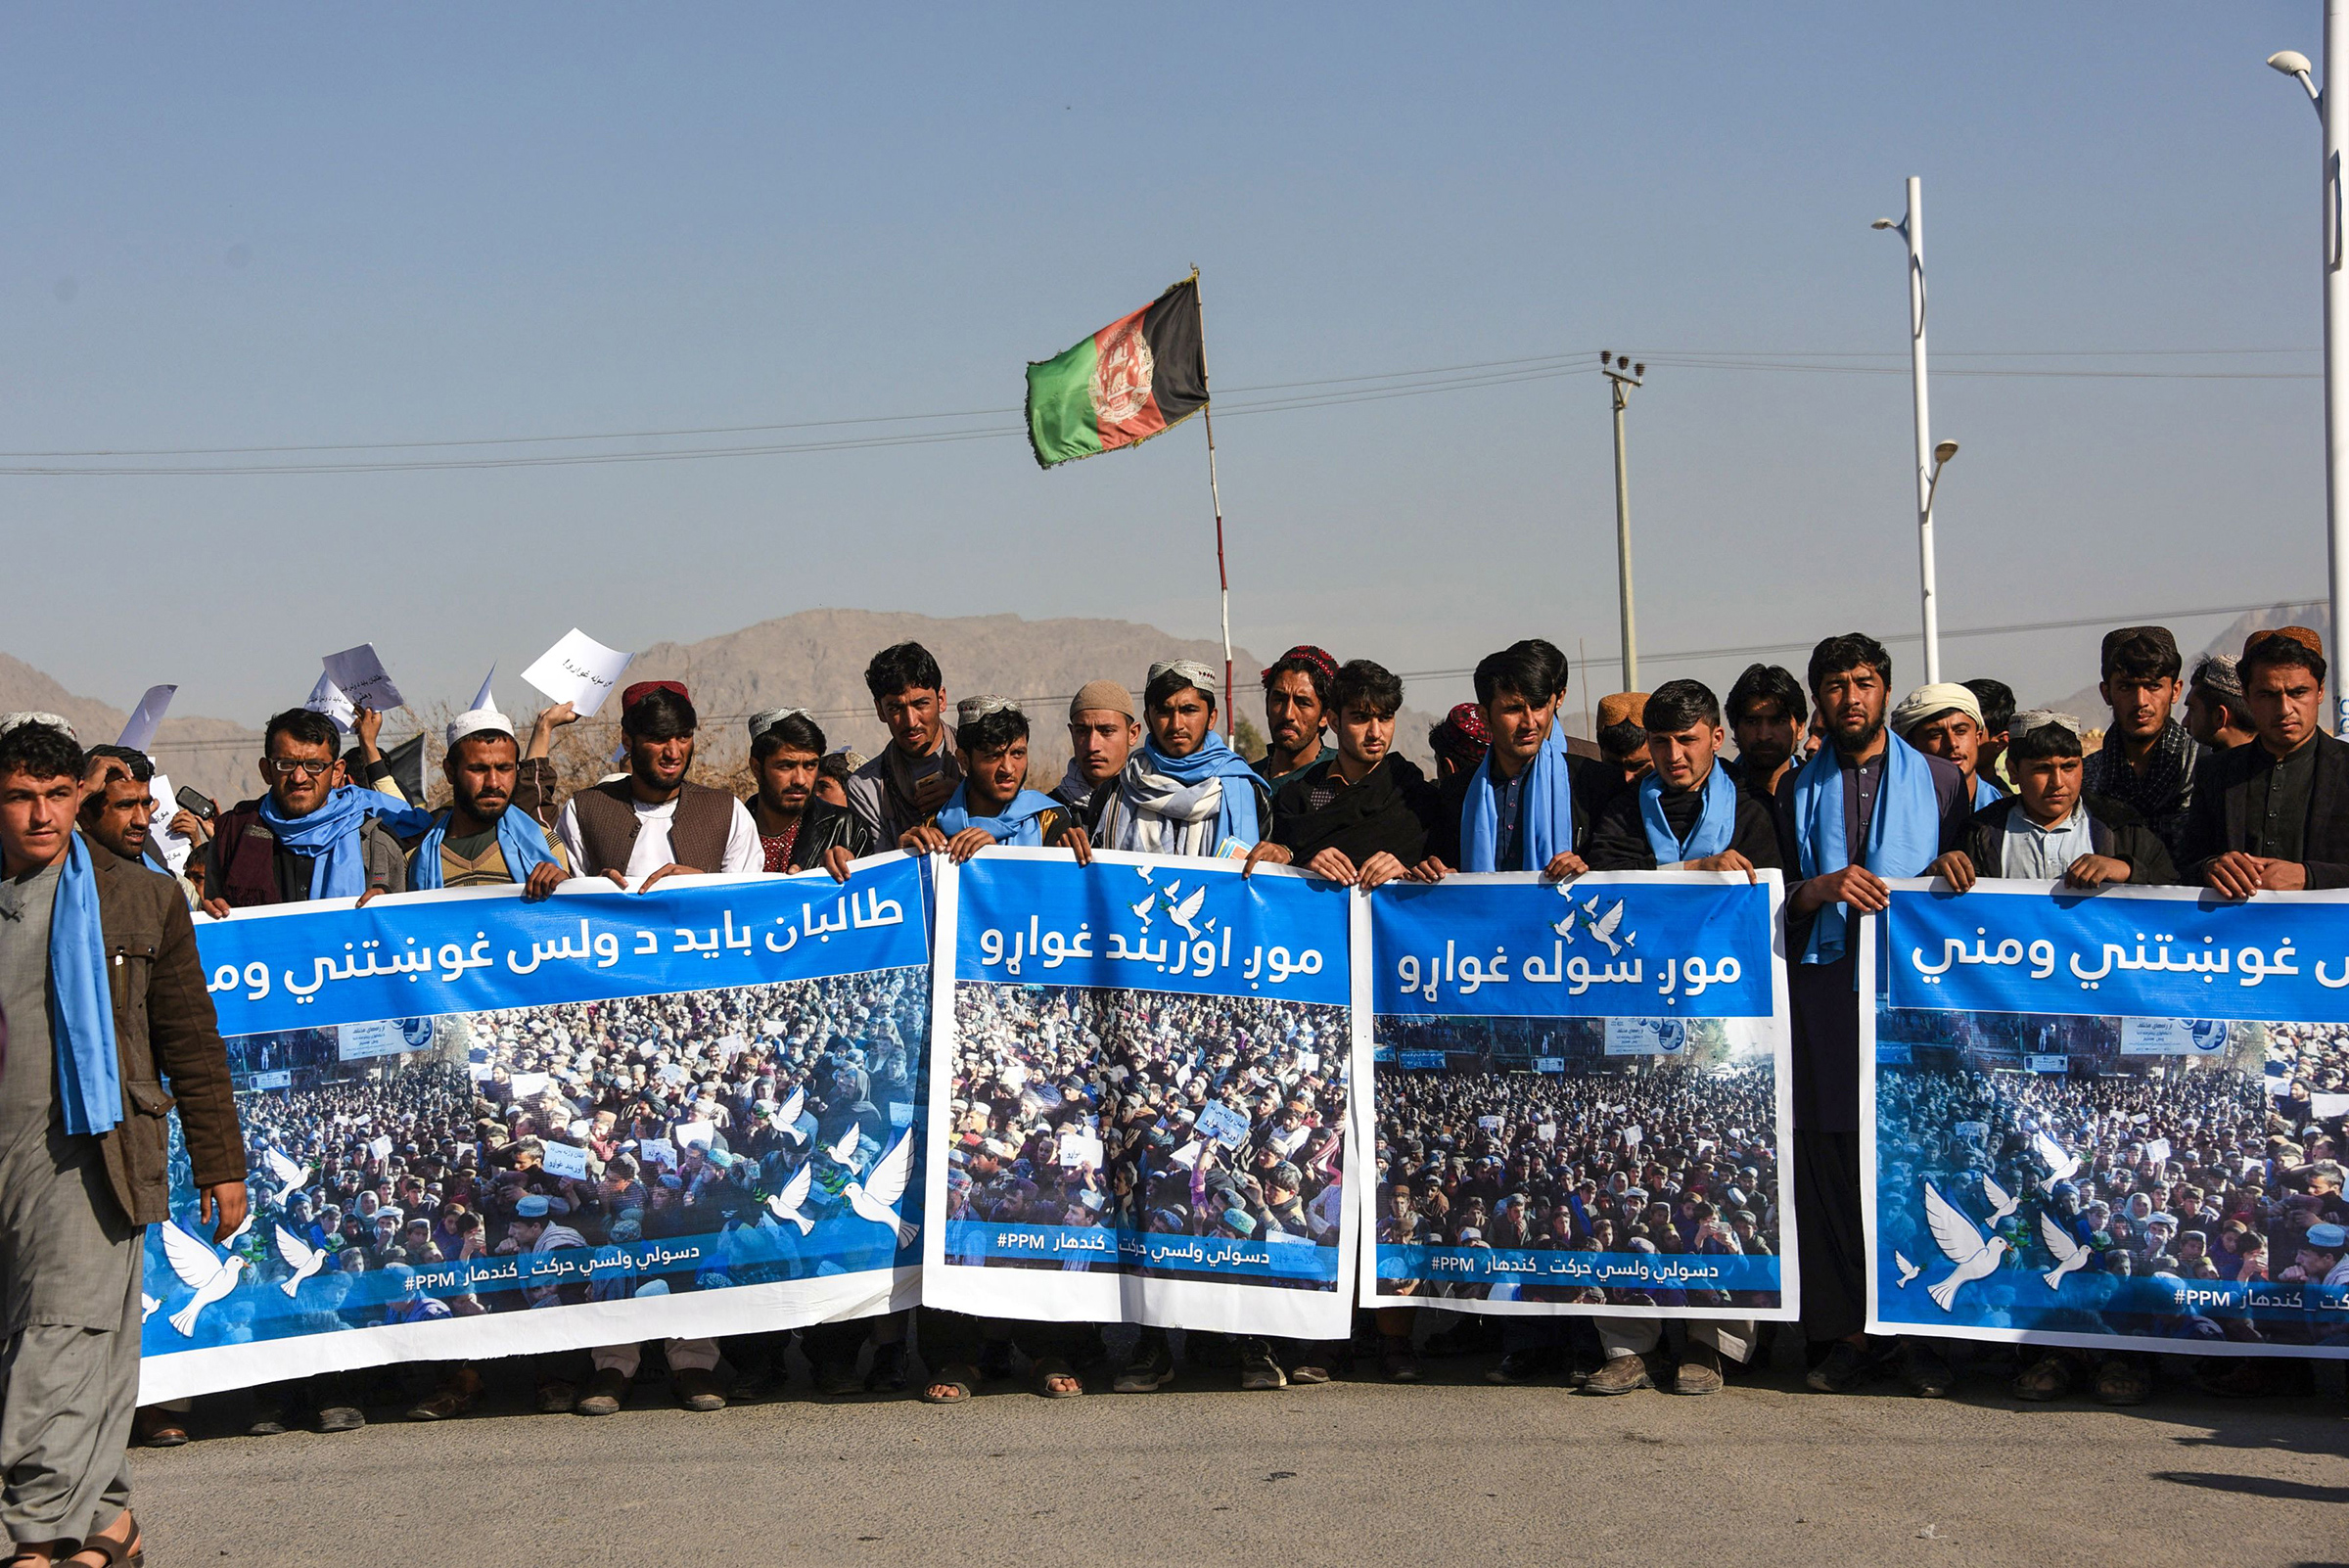 Afghan protesters march for peace and ceasefire as they hold banners in the Kandahar province on Jan. 17, 2019. (Javed Tanveer—AFP via Getty Images)